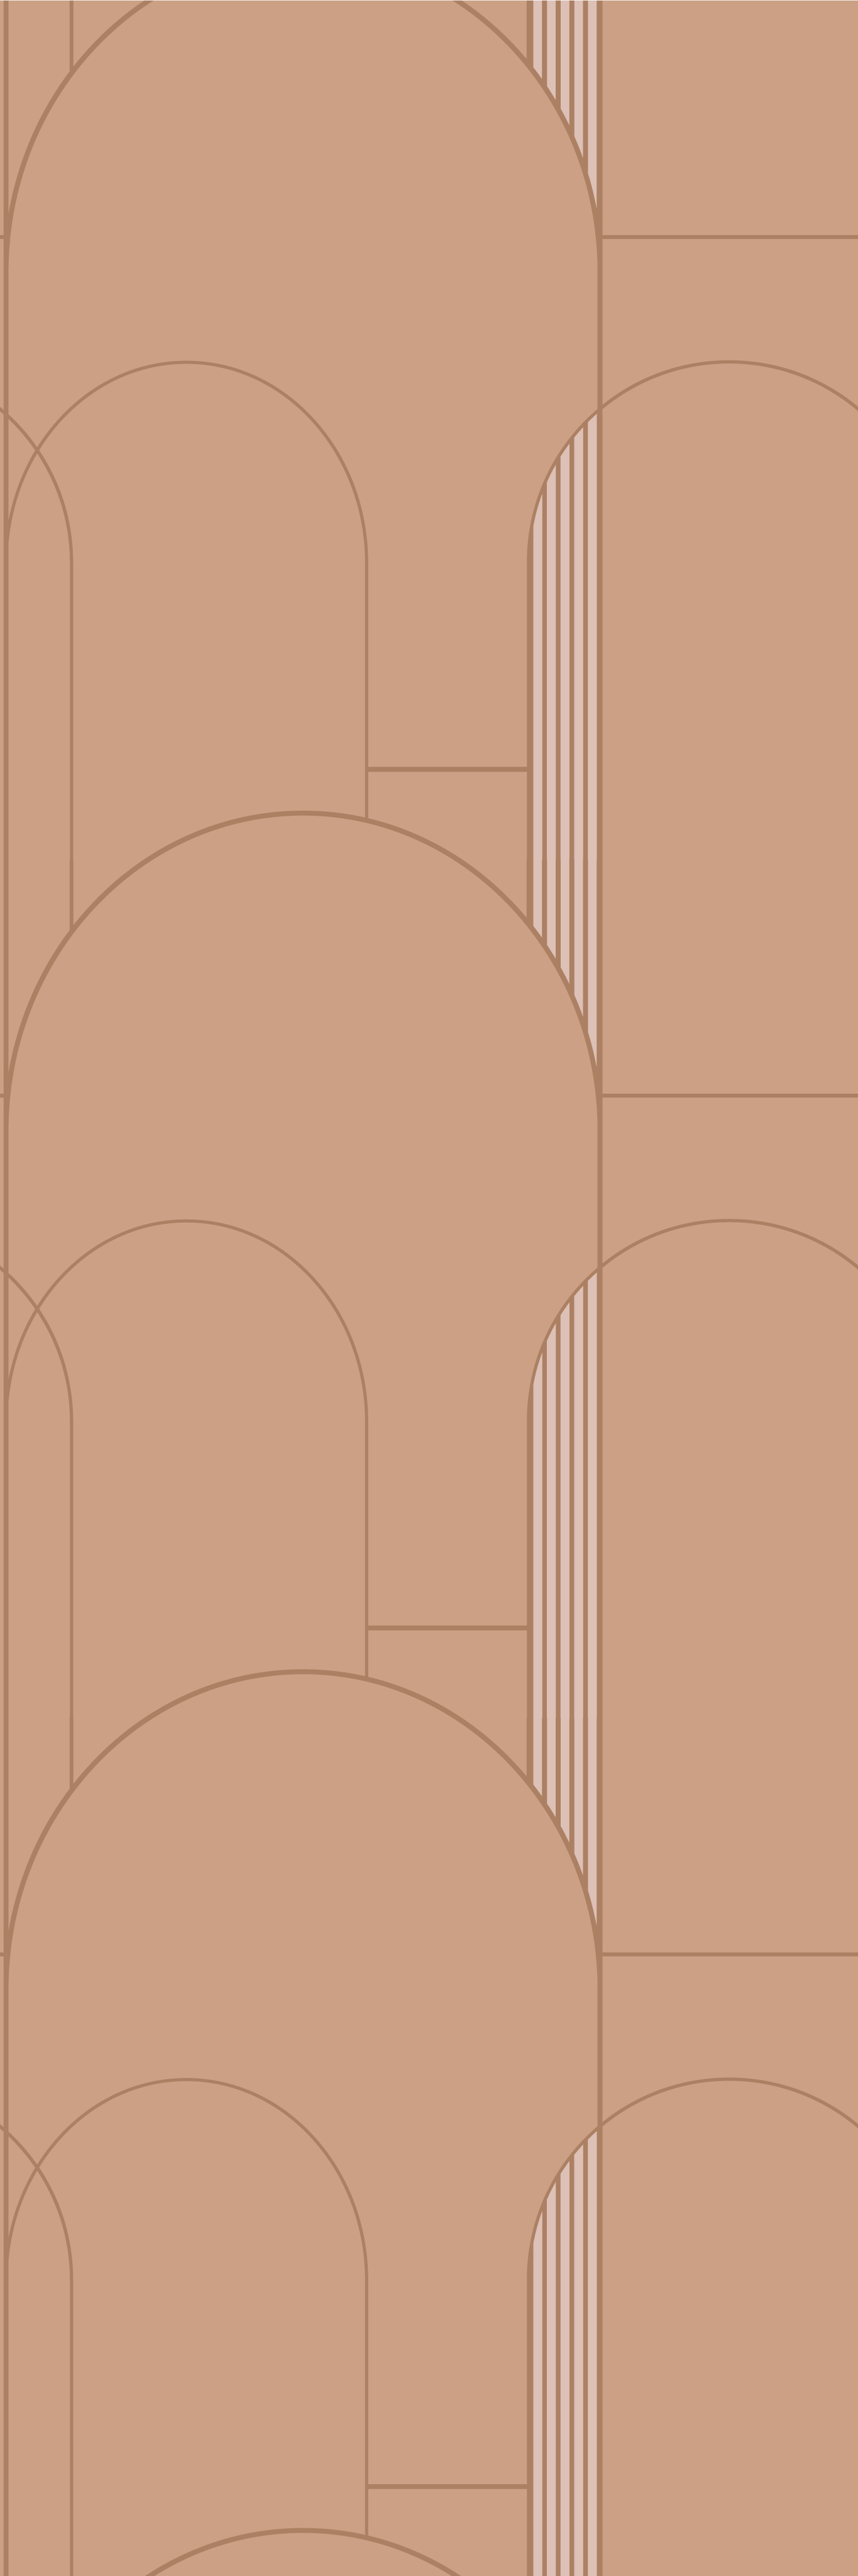 A wallpaper with an abstract design - Terracotta